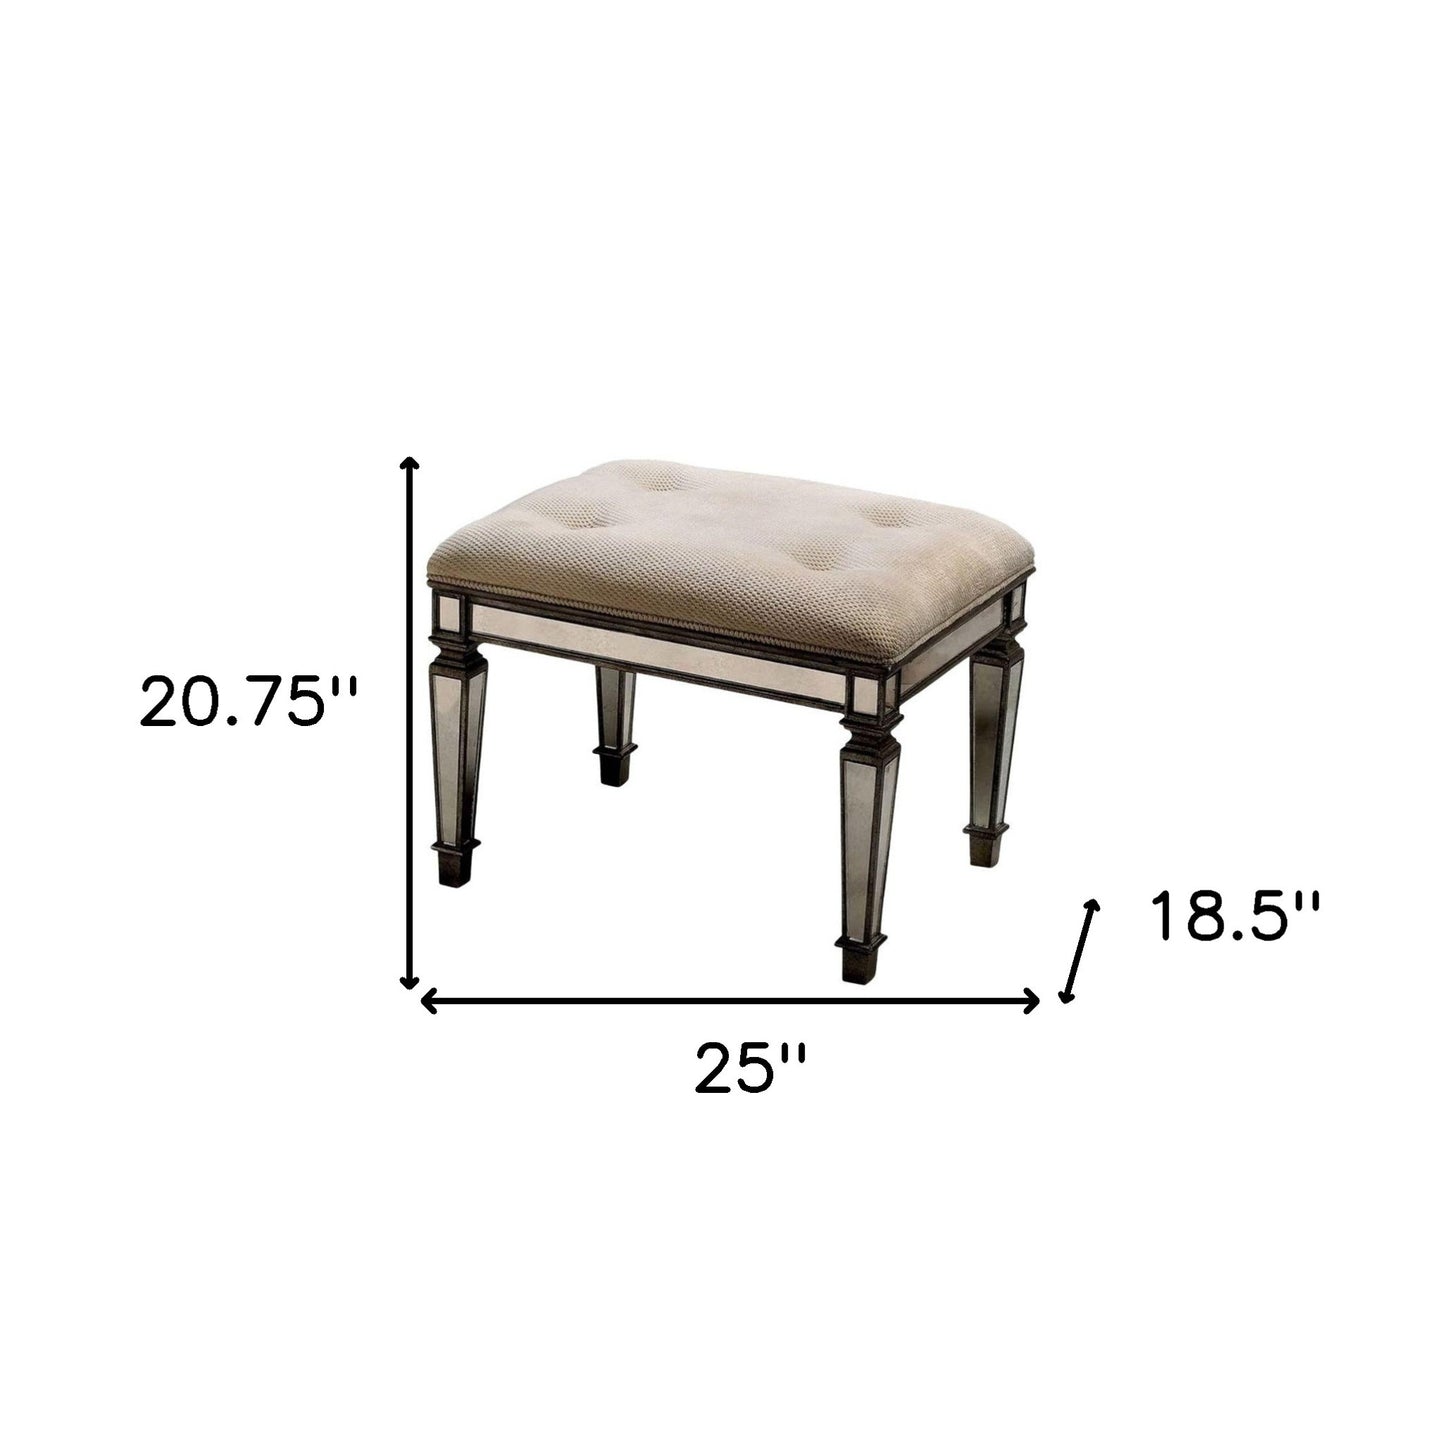 25" Chocolate And Ivory Upholstered 100% Cotton Bedroom Bench